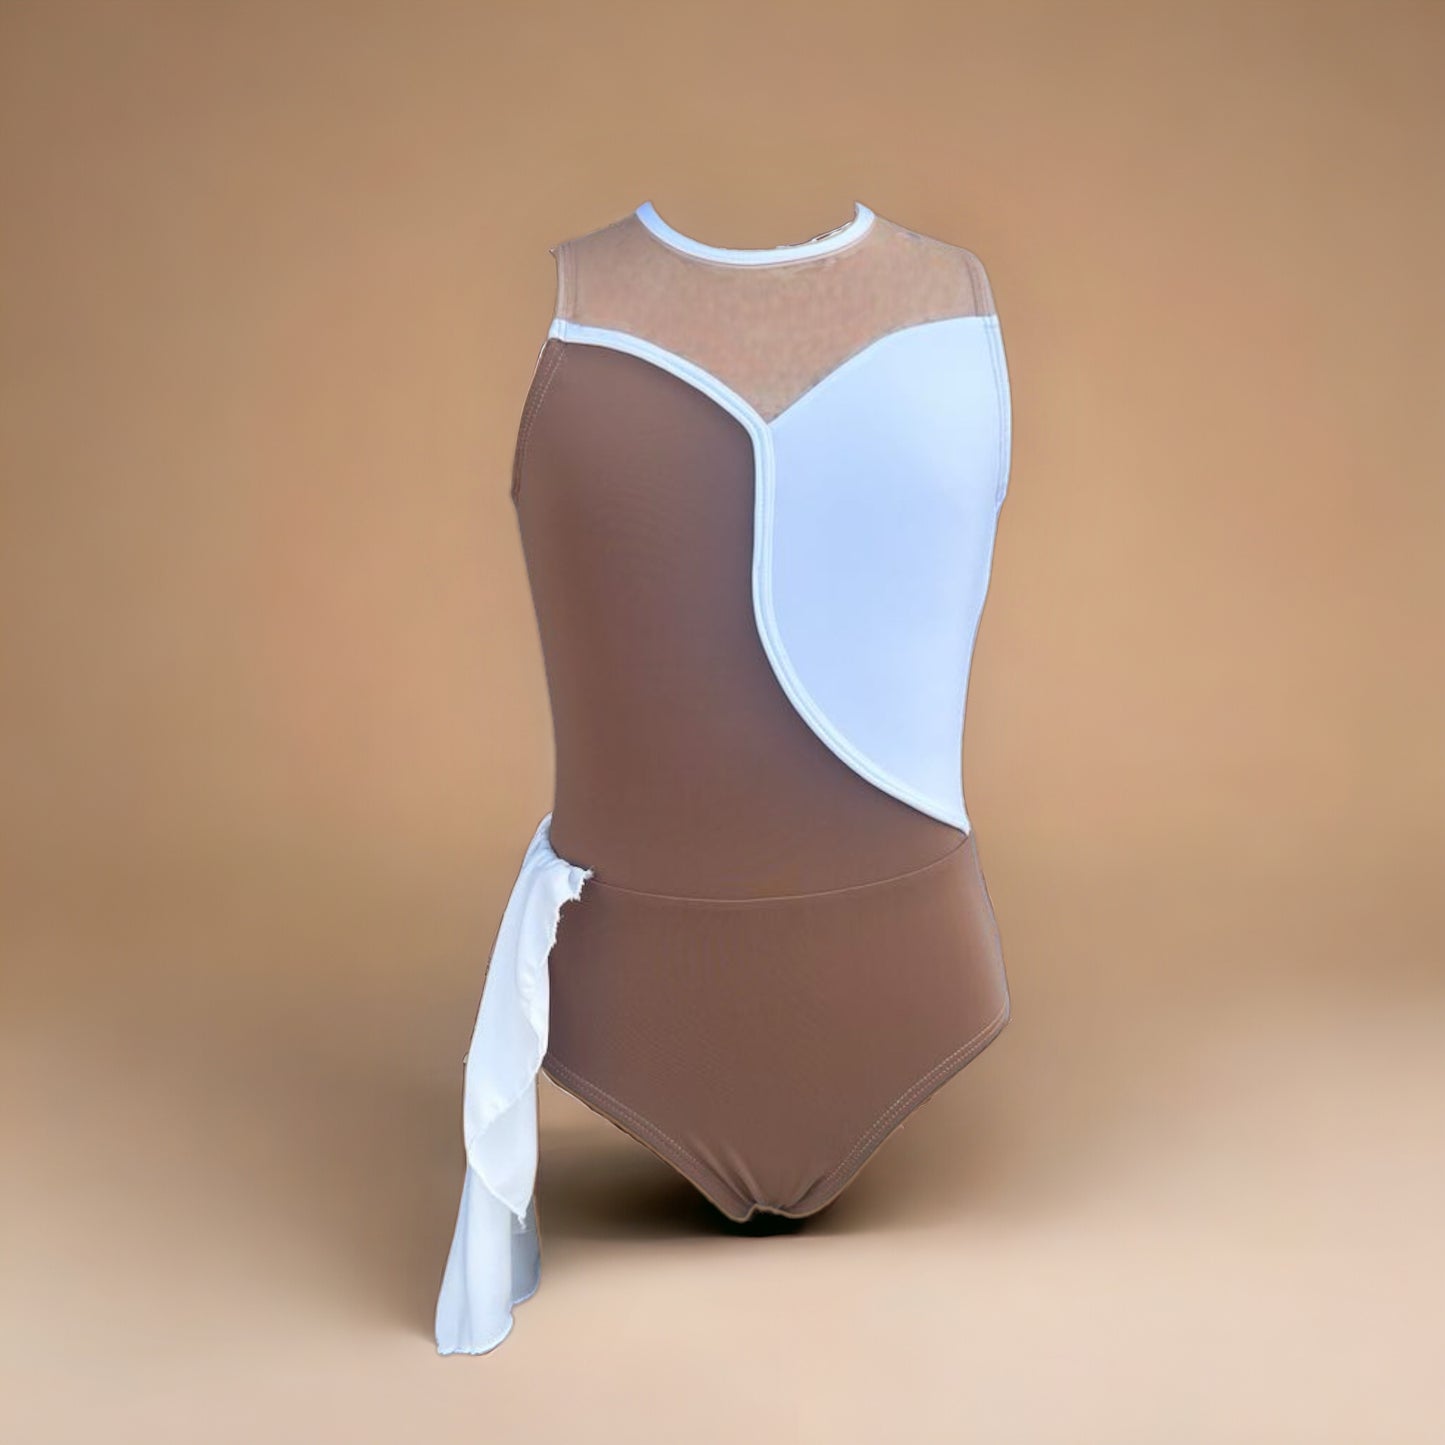 Get ready to steal the show with our jaw-dropping two-tone leotard by Opra Dancewear! This contemporary masterpiece features a chiffon side skirt that adds an extra dose of grace and elegance to your dance routine. Unleash your inner diva and elevate your performance with this limited edition stunner.